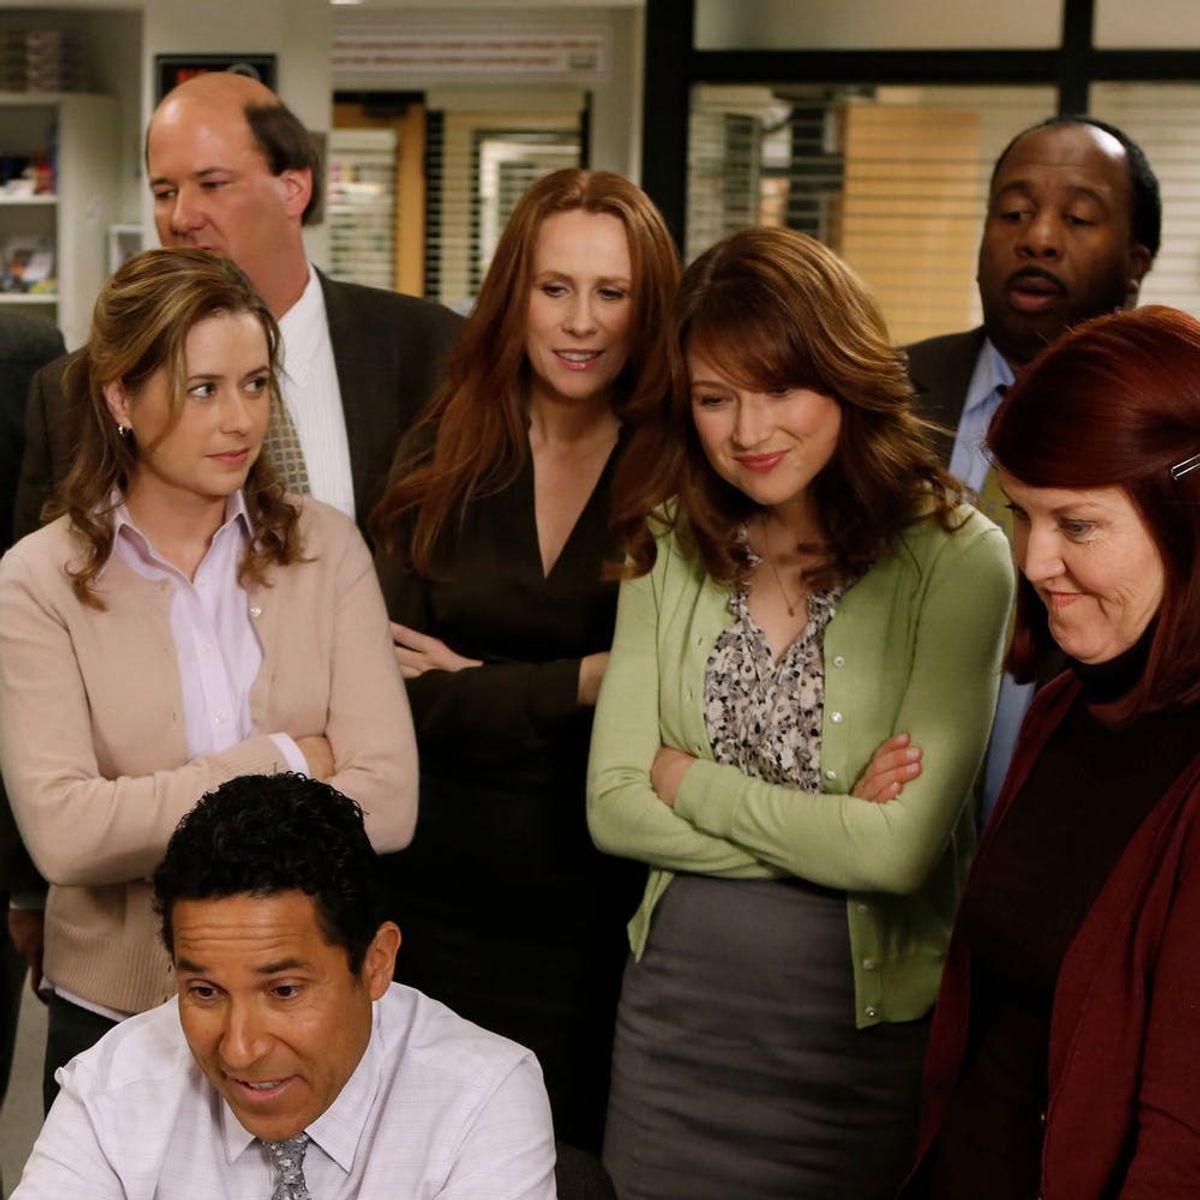 A Revival of ‘The Office’ Is Reportedly in the Works at NBC